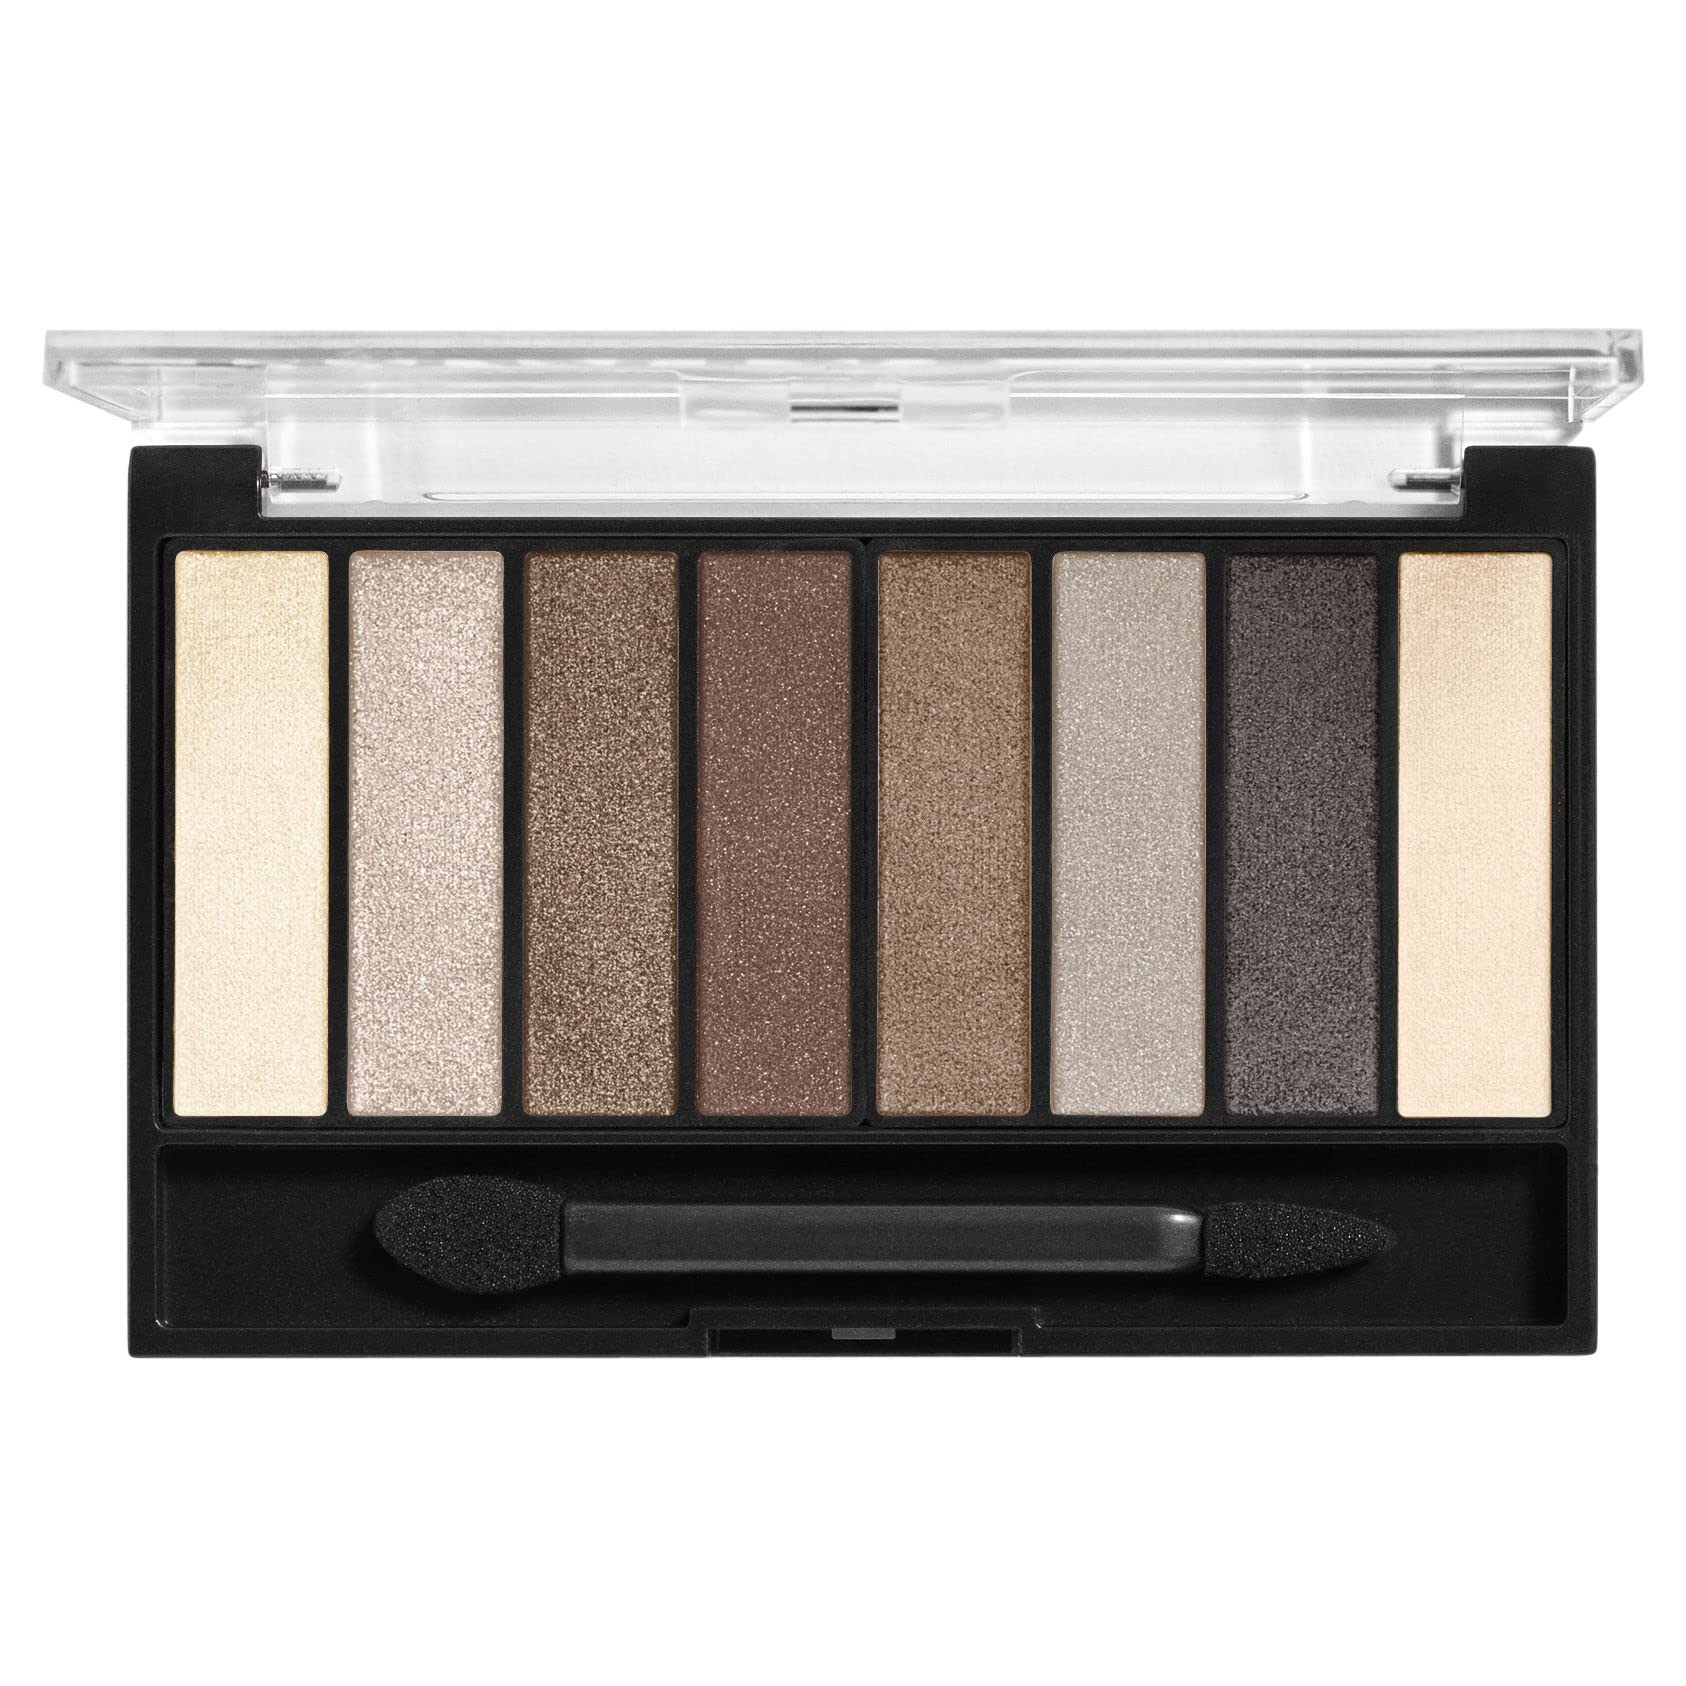 COVERGIRL truNAKED Eyeshadow Palette, Nudes 805, 0.23 ounce (Packaging May Vary), Pack of 1